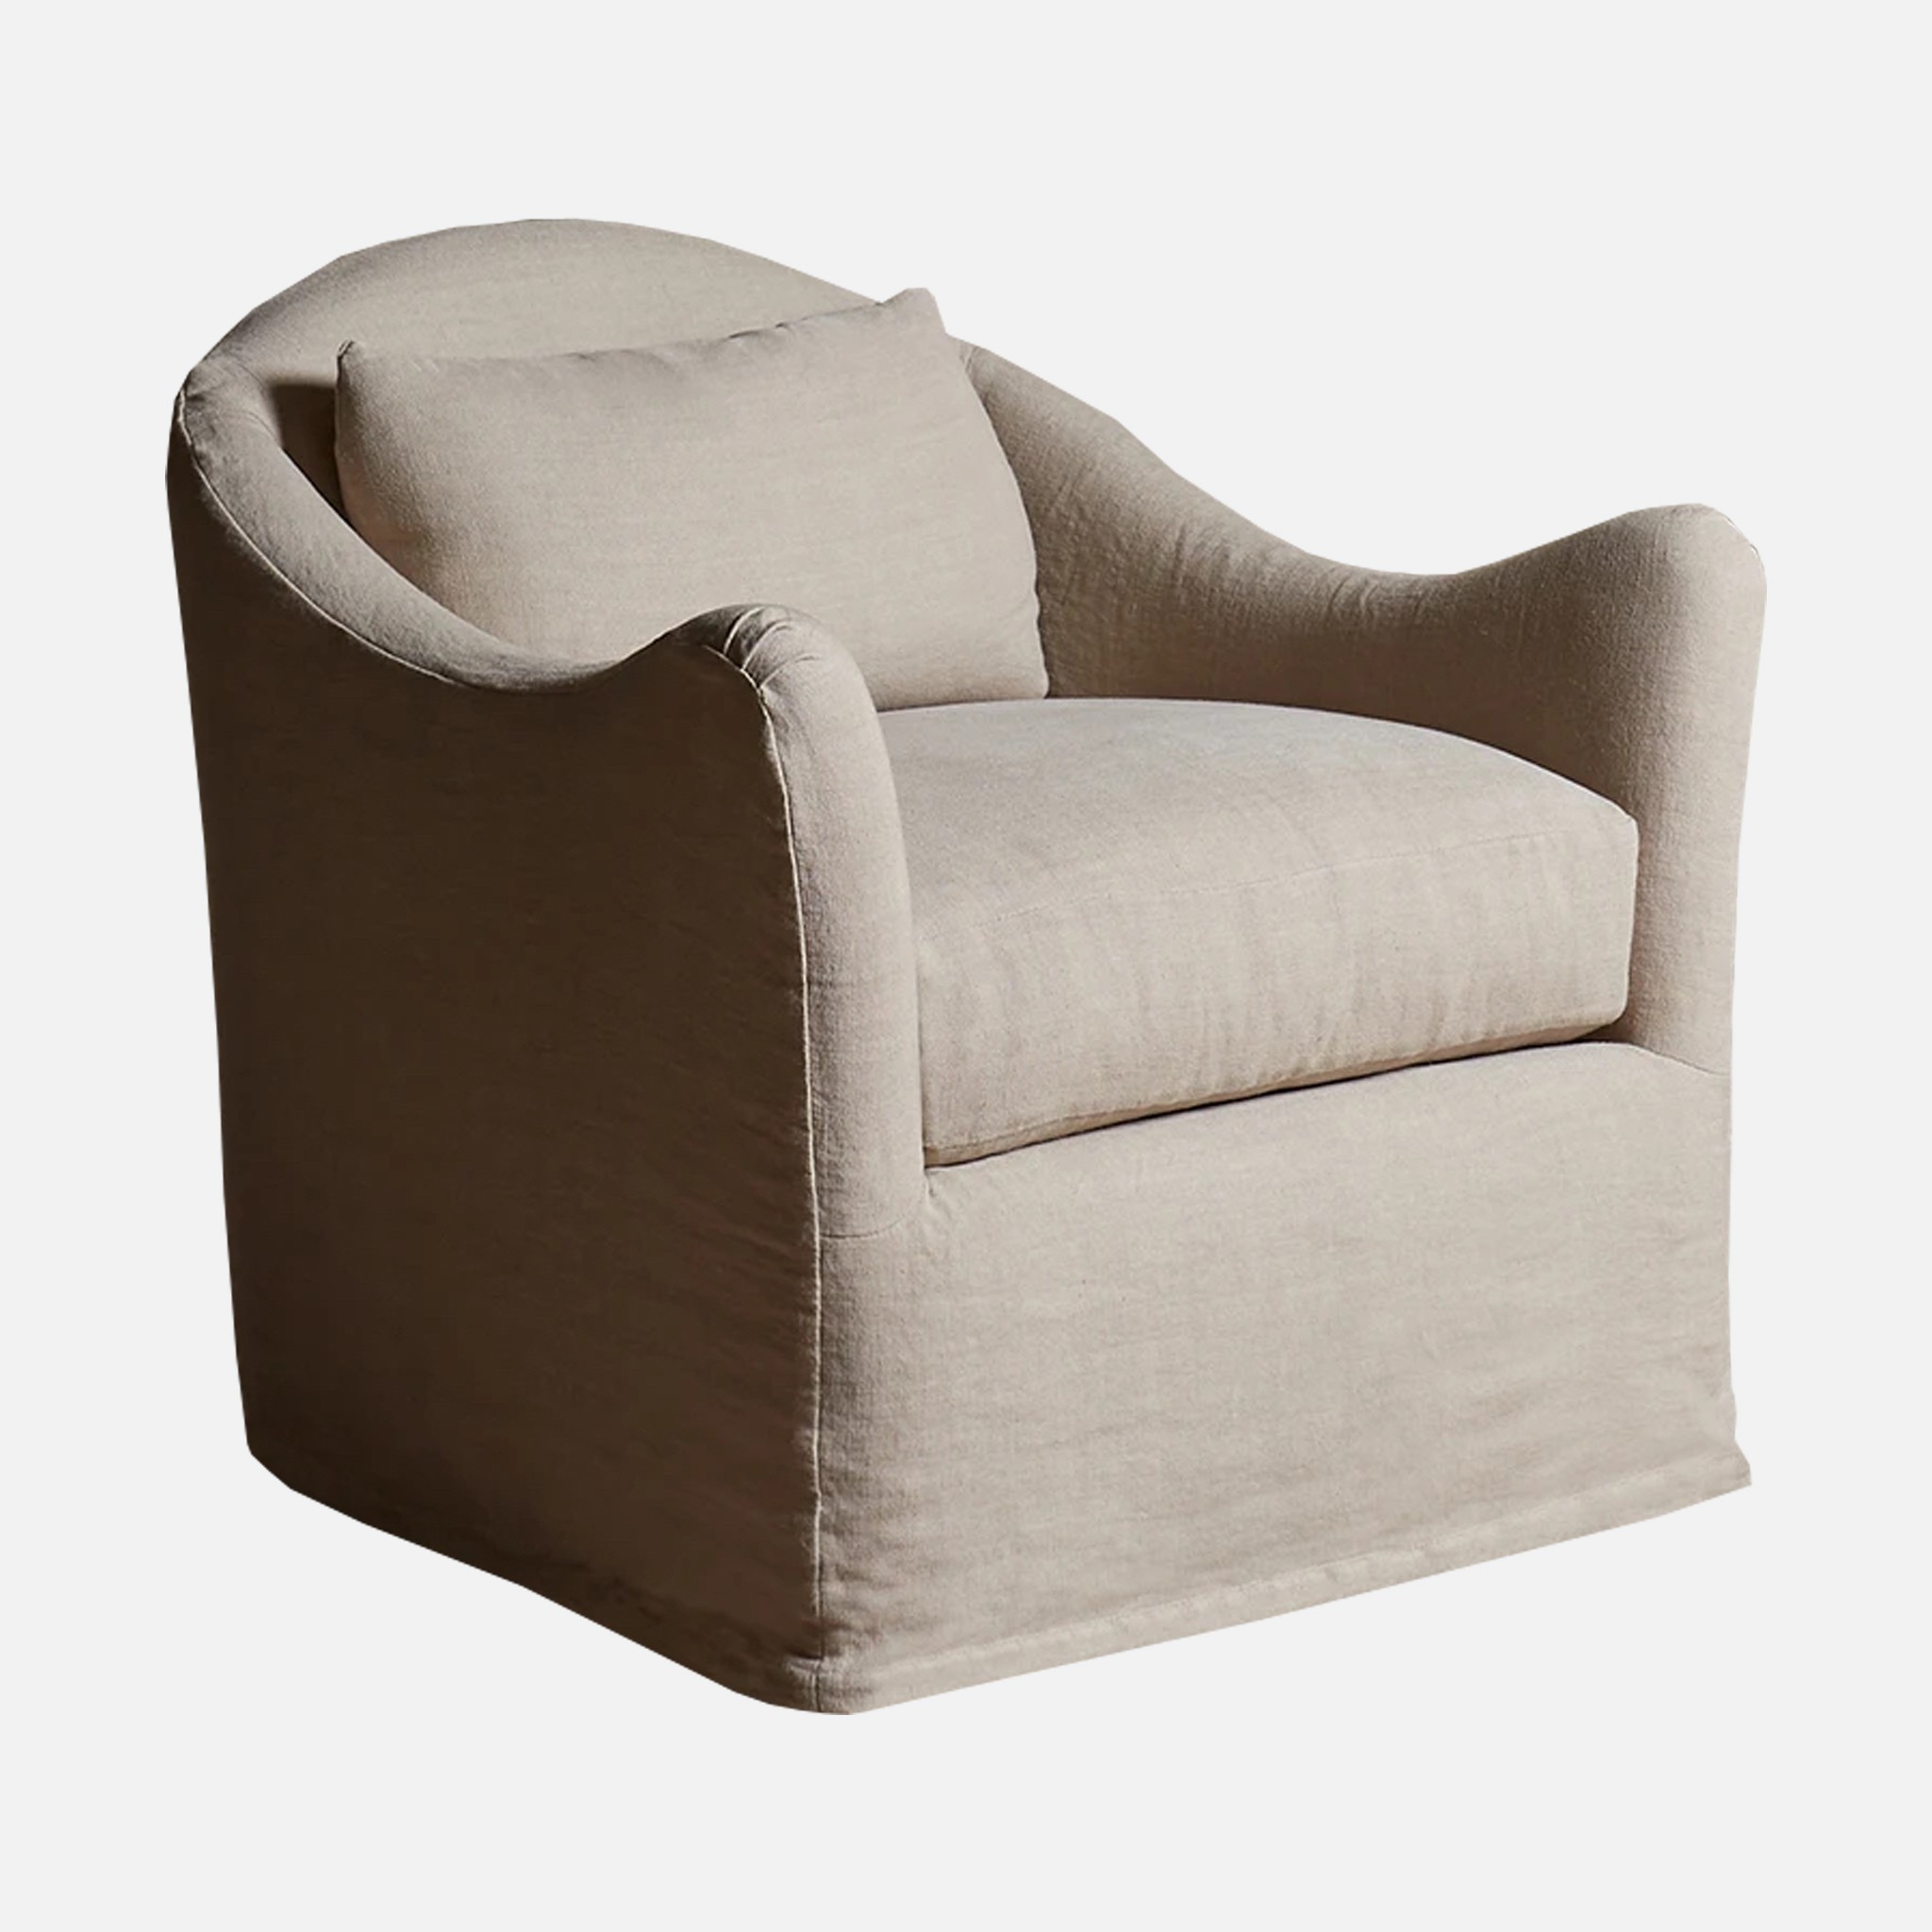 The image of an The Expert Collection Classic Slip Armchair product